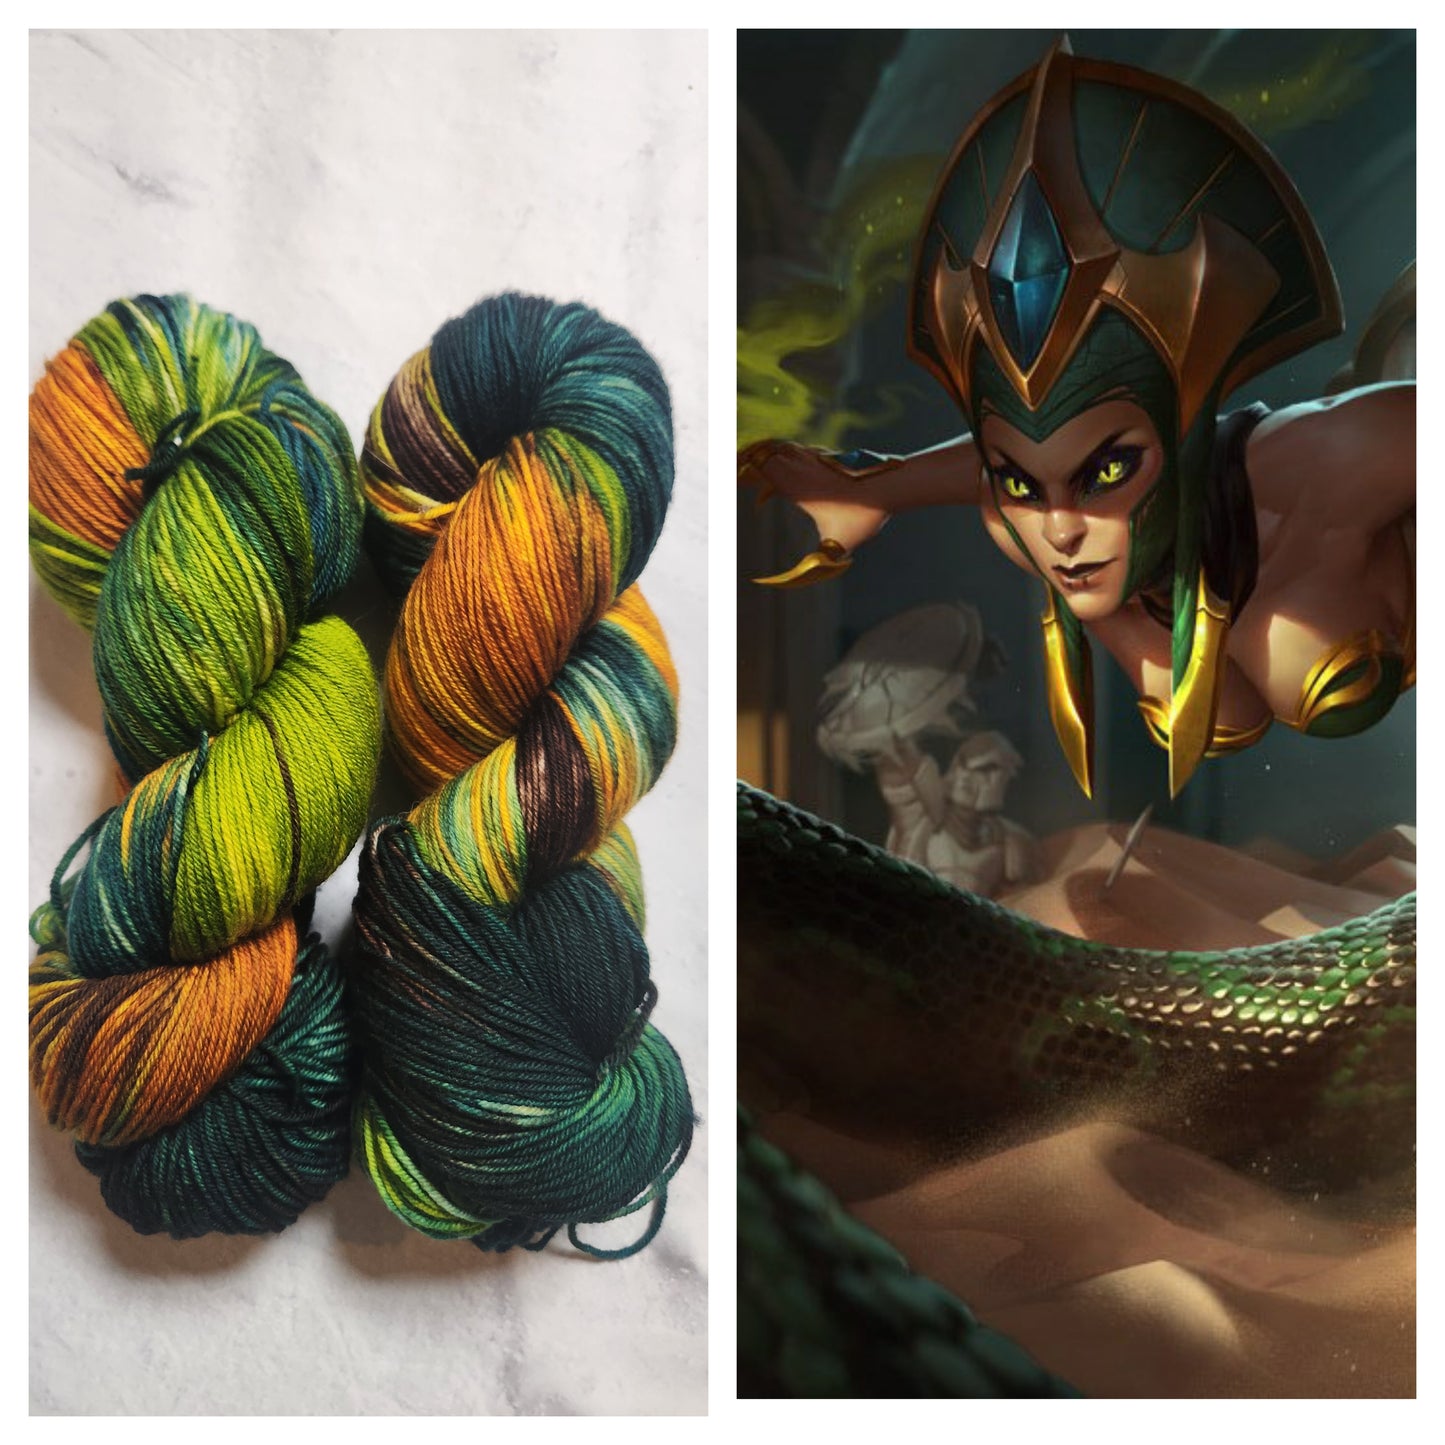 The Serpent's Embrace - League of Legends Inspired